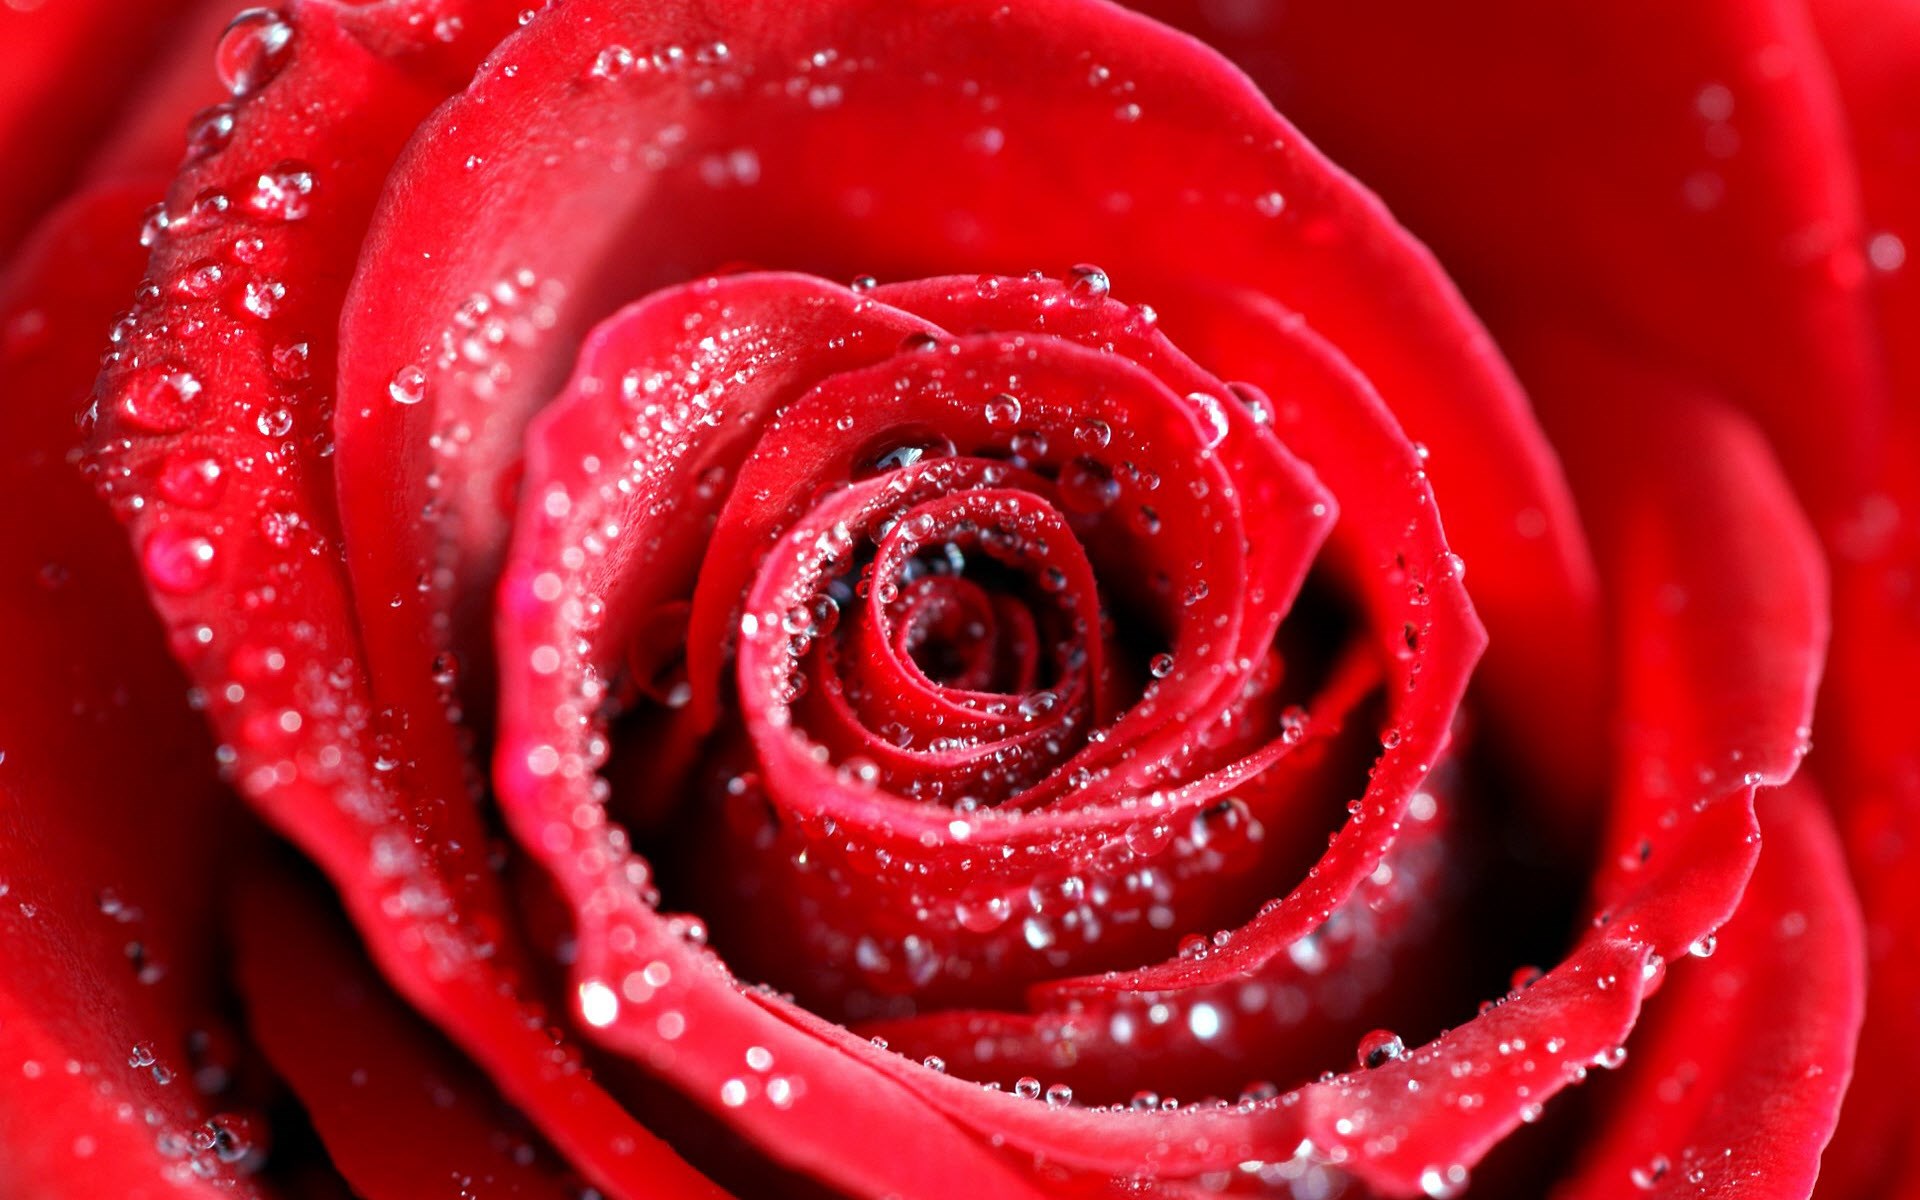 Water Drops On Red Rose - [1920 x 1200]